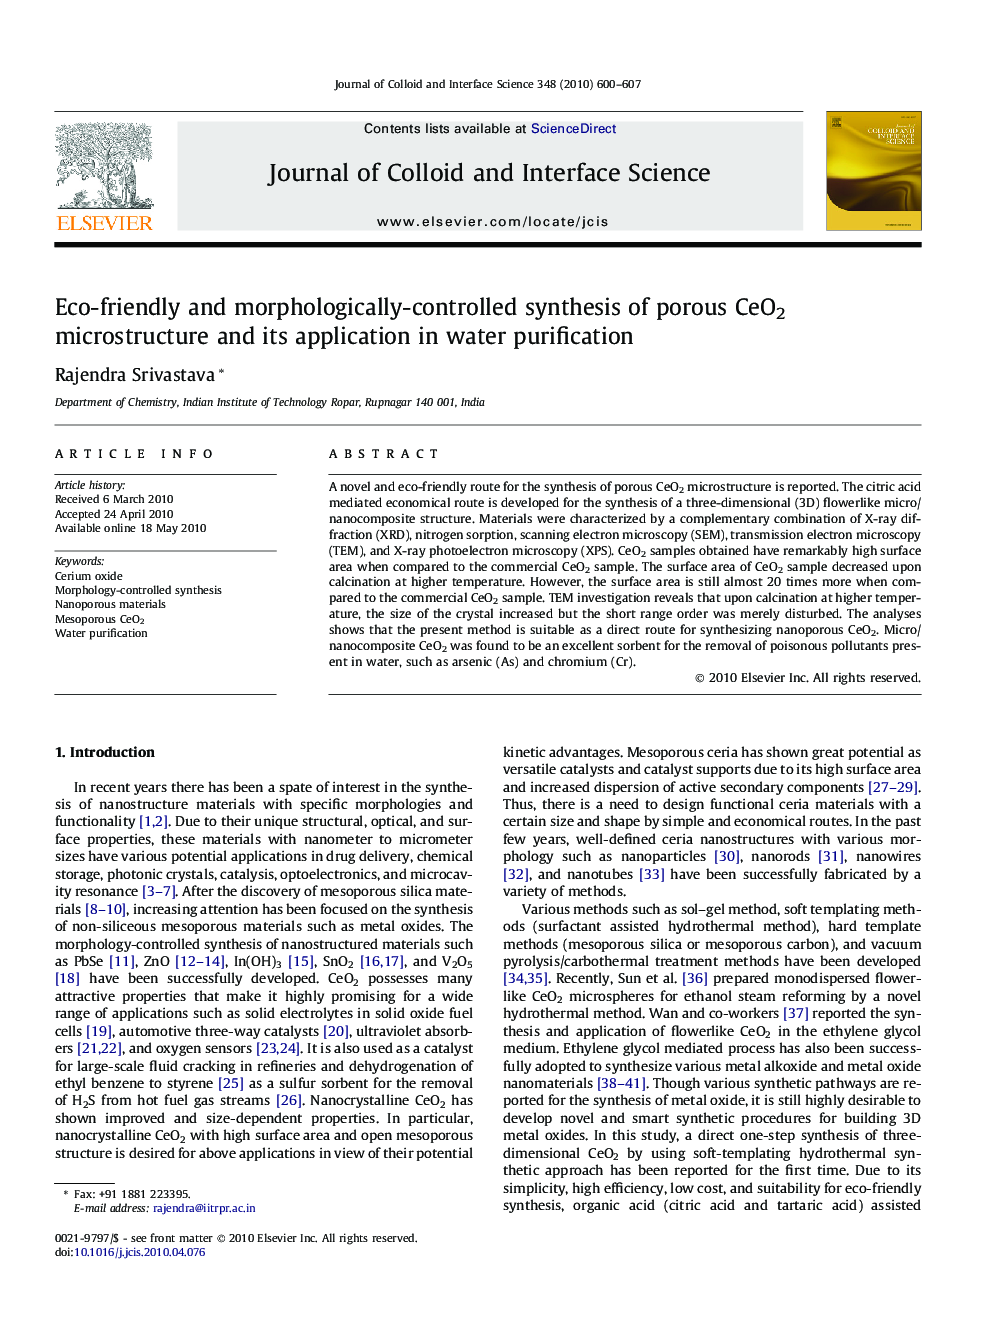 Eco-friendly and morphologically-controlled synthesis of porous CeO2 microstructure and its application in water purification